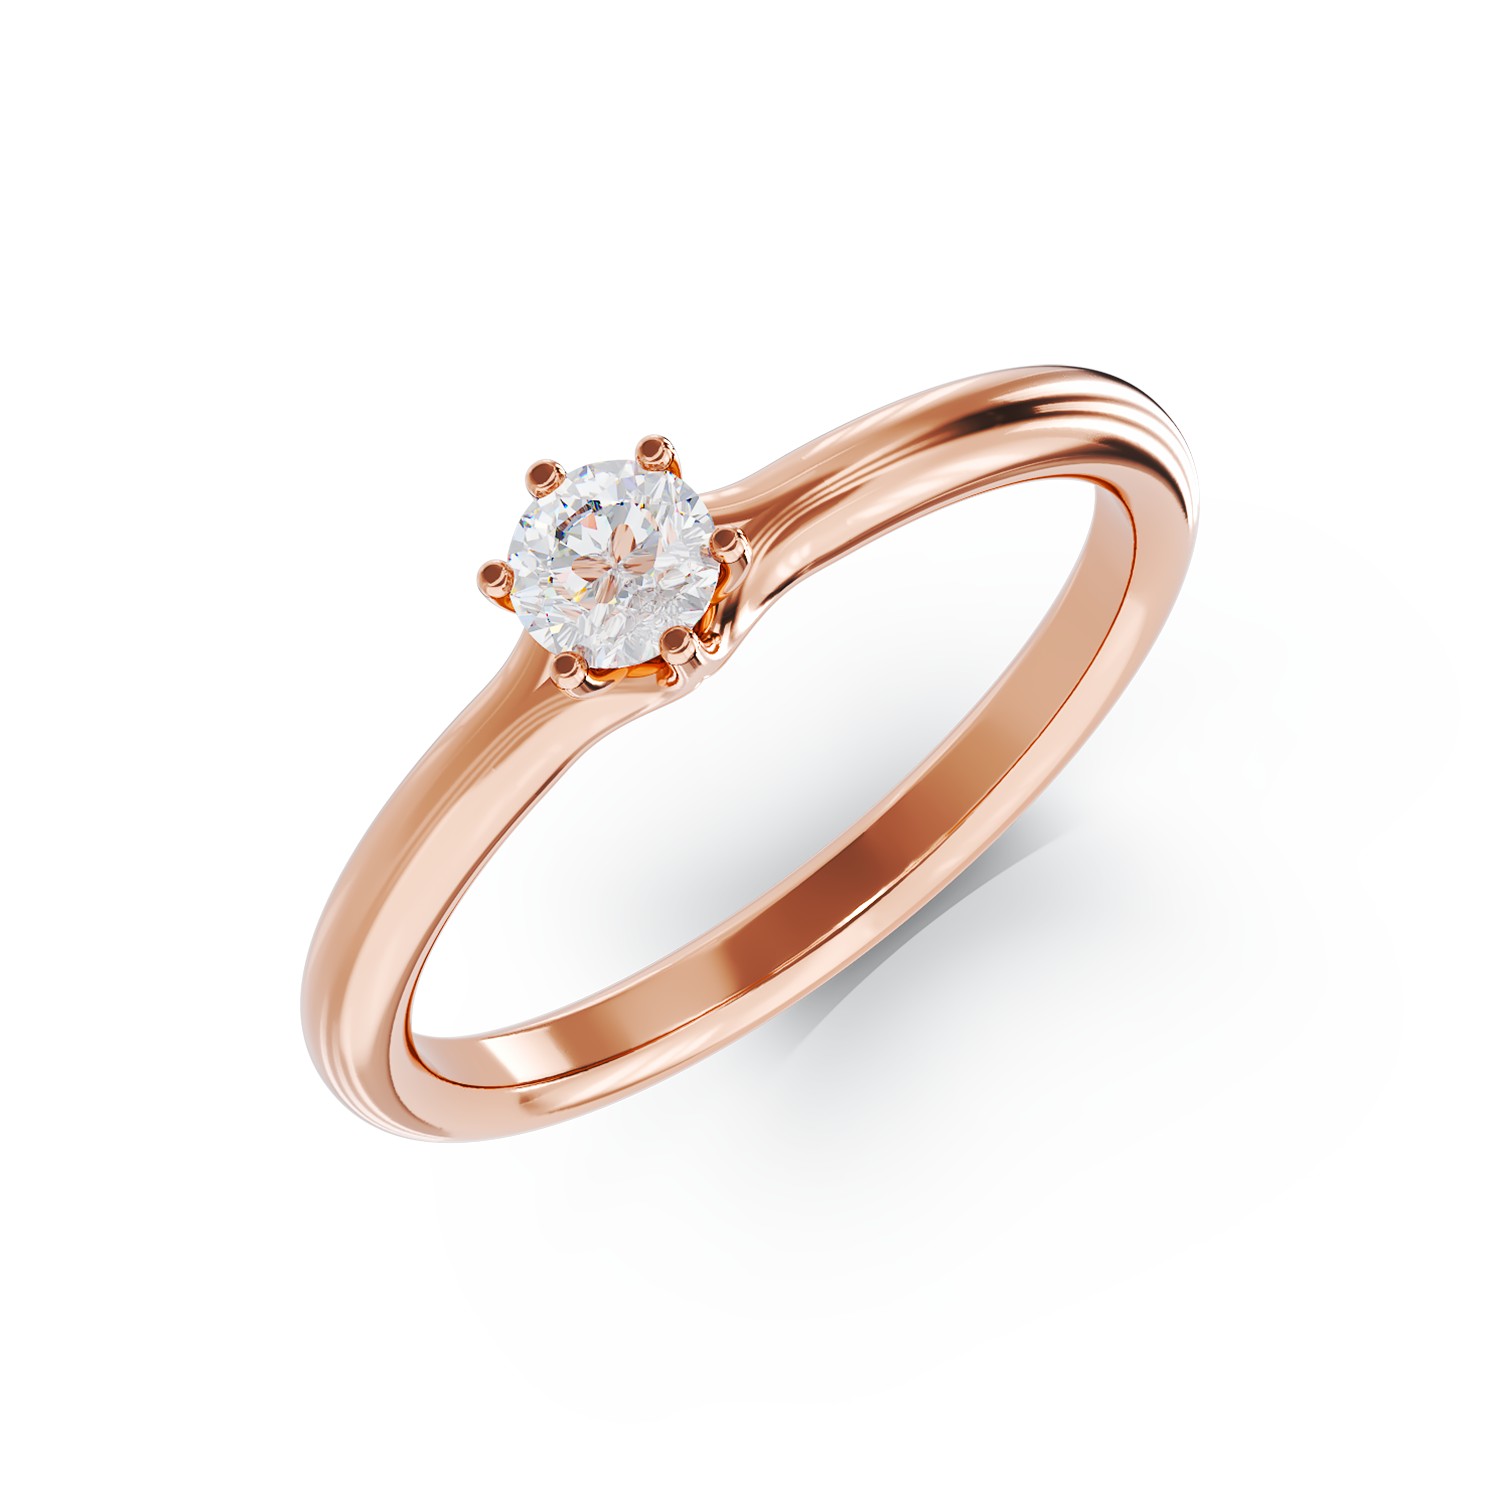 Rose gold engagement ring with 0.2ct solitaire diamond